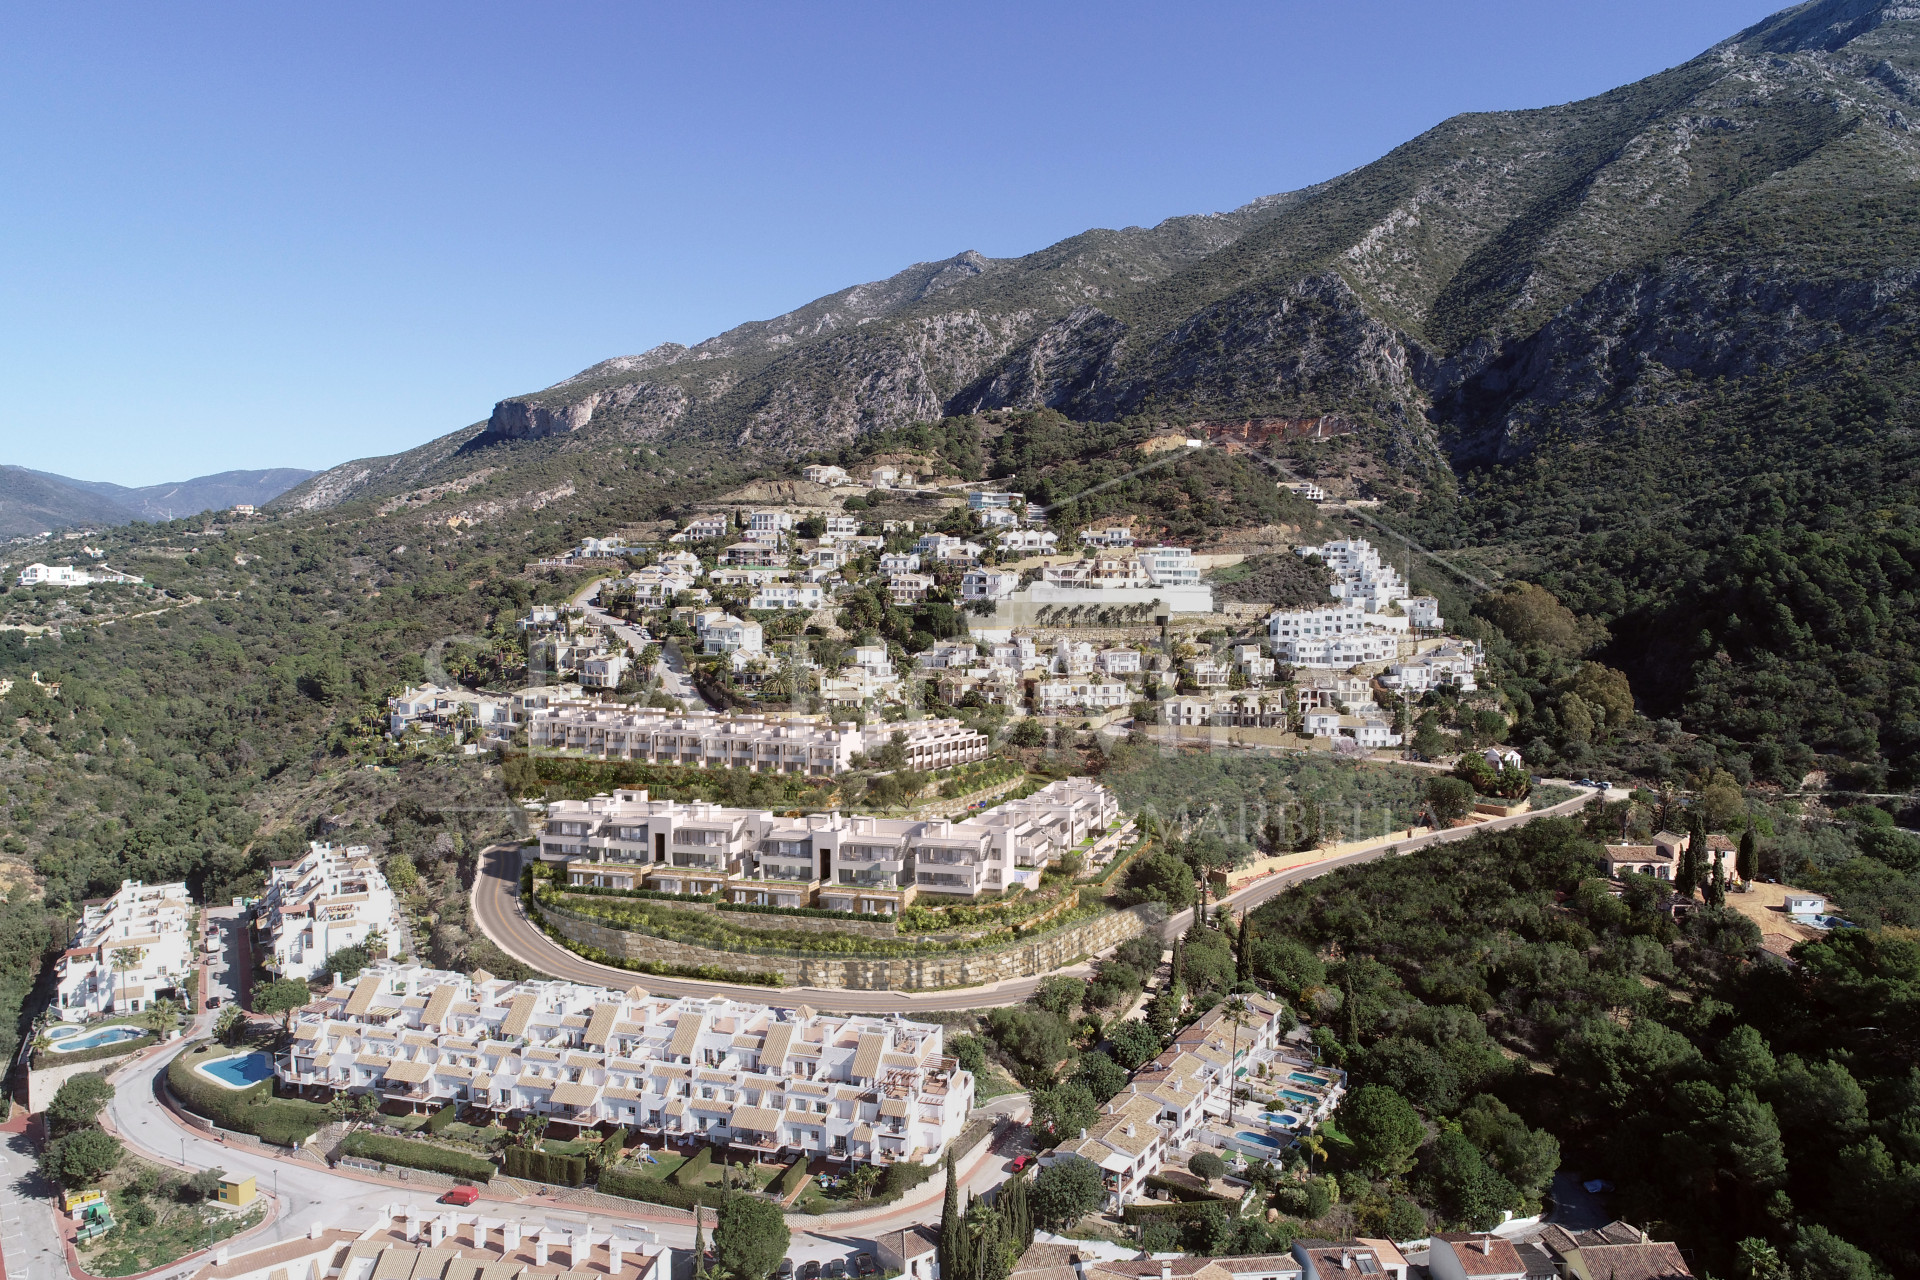 Almazara Hills, modern apartments surrounded by nature close to Marbella